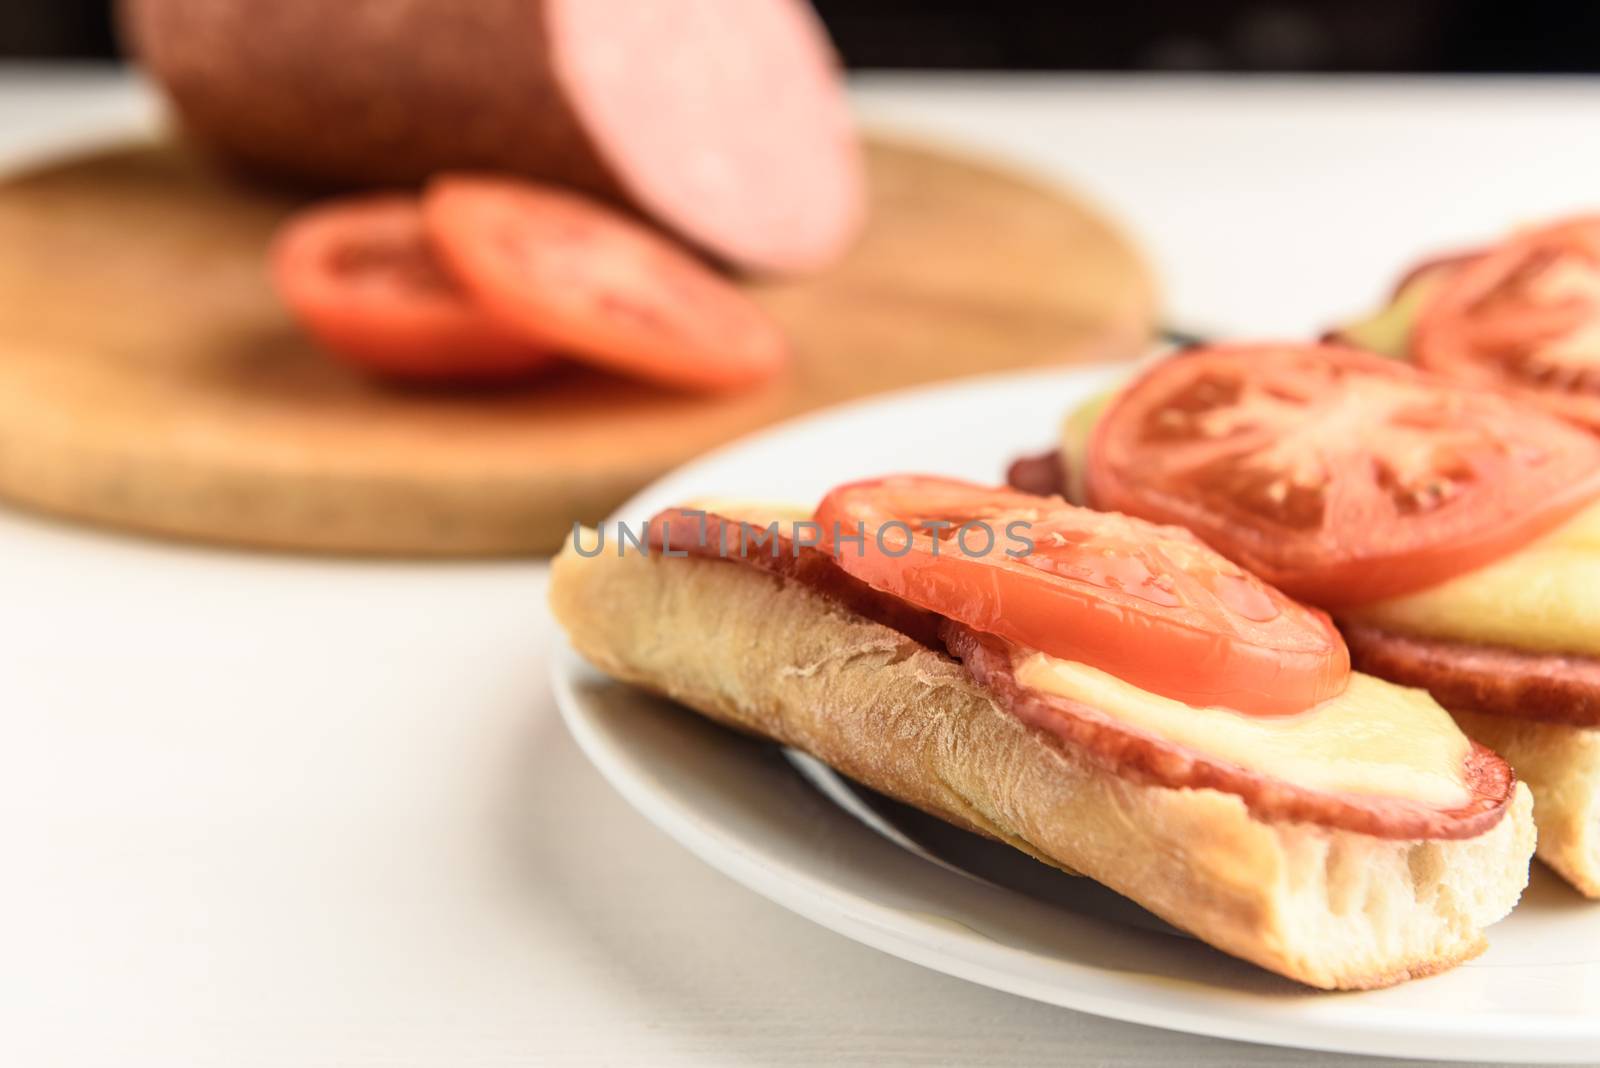 hot sandwiches with tomatoes by Andreua